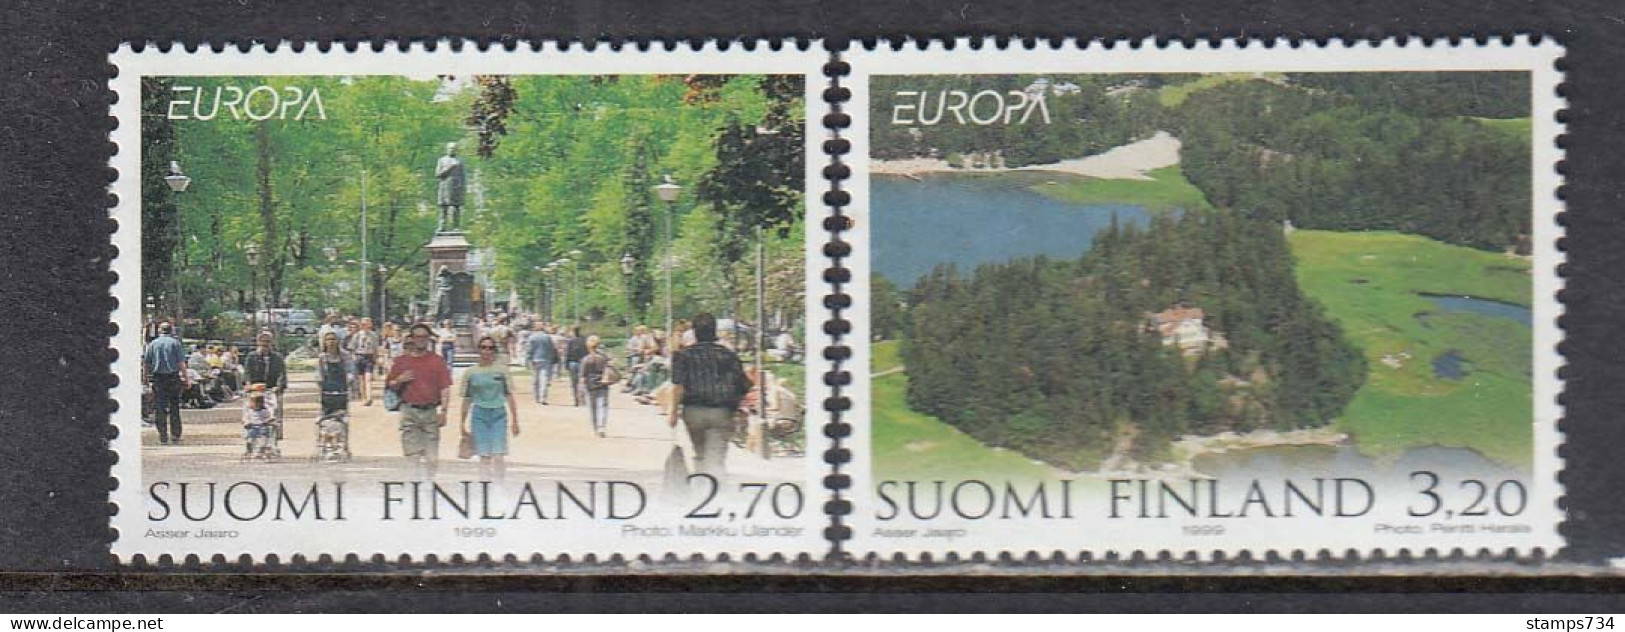 Finland 1999 - EUROPA: Nature And National Parks, Mi-Nr. 1474/75, MNH** - Unused Stamps